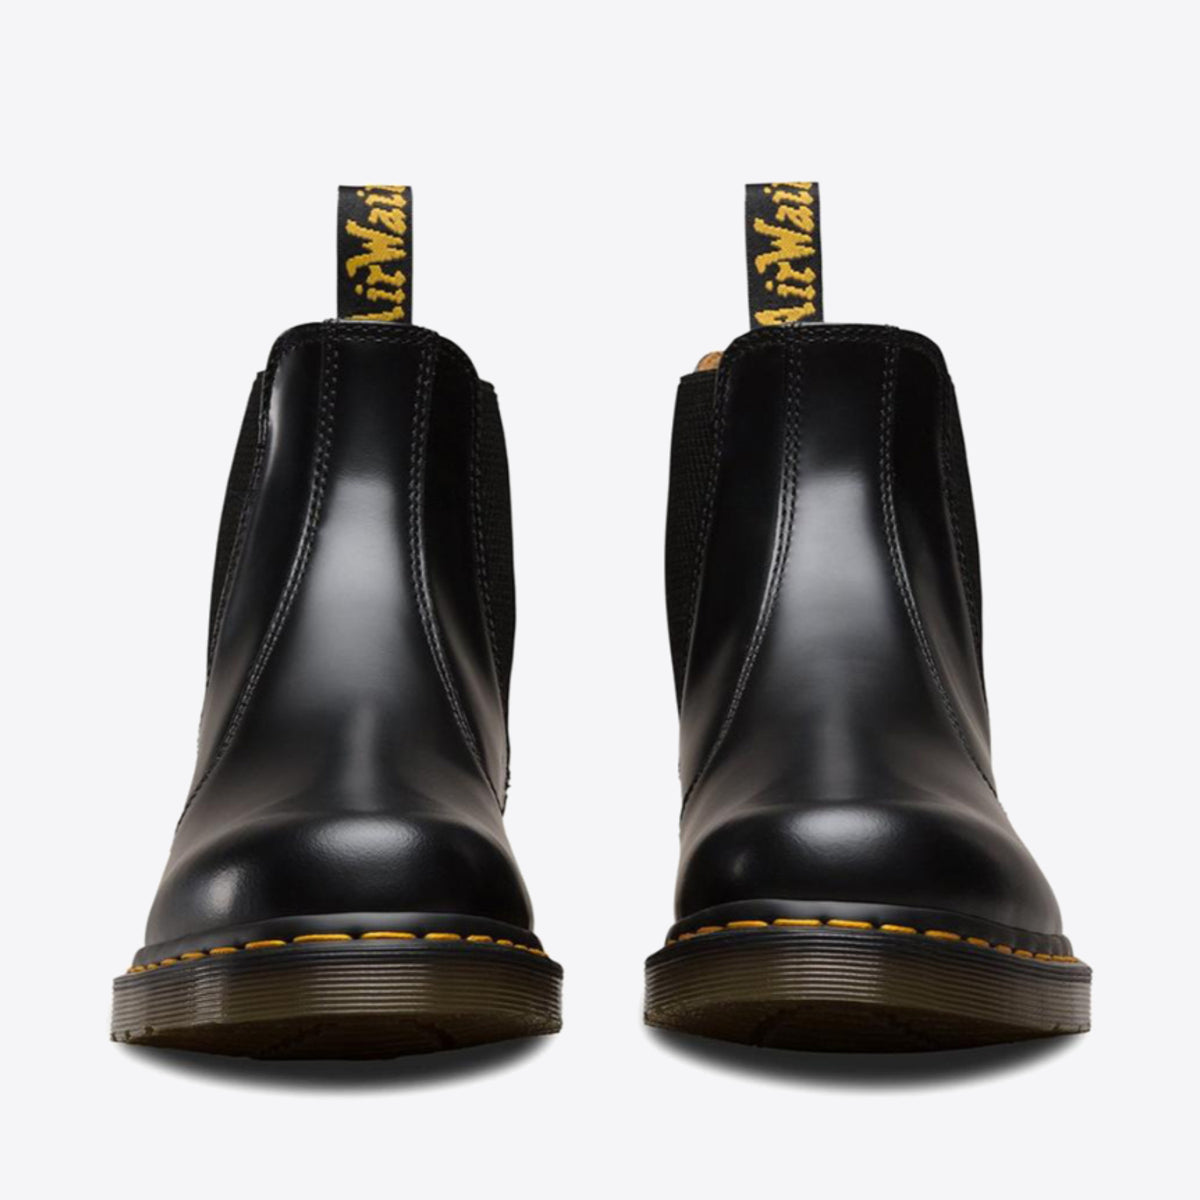 DR MARTENS 2976 Yellow Stitch Chelsea Boot Black Smooth - Image 7